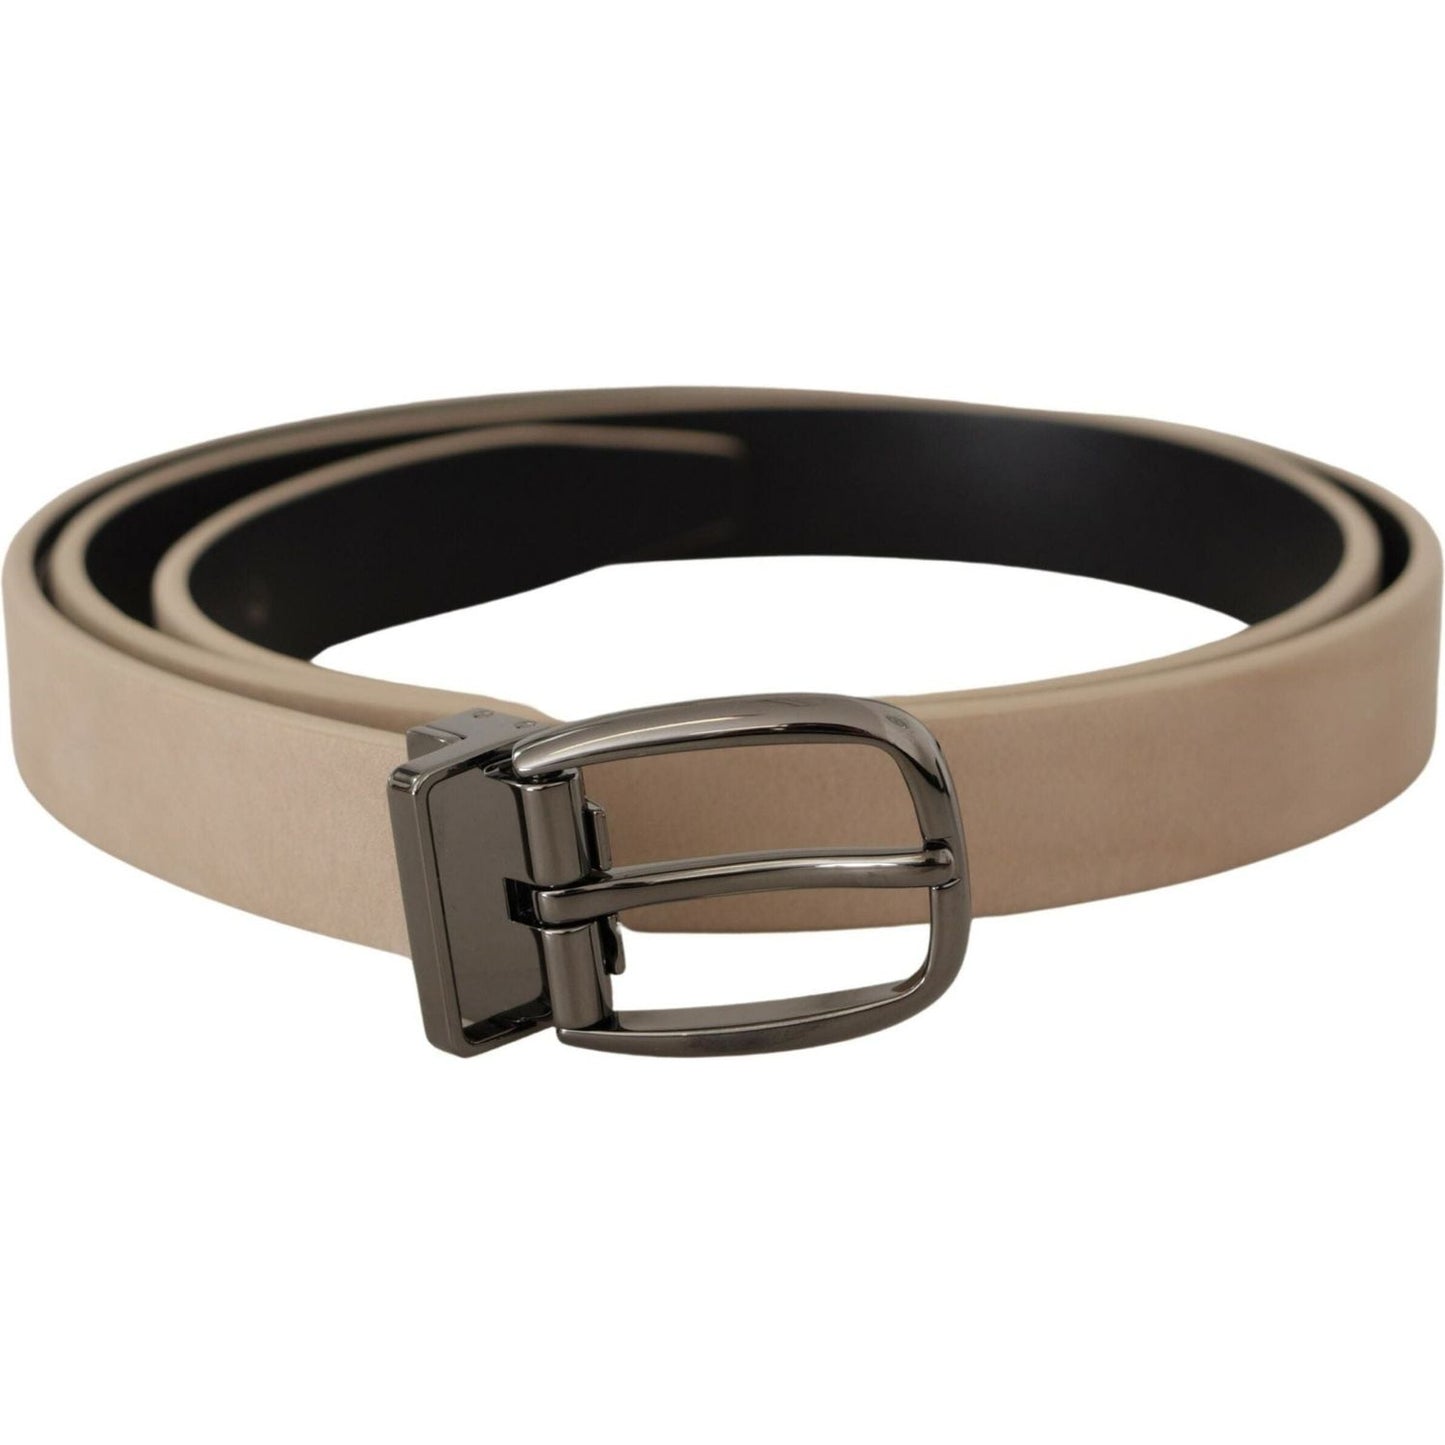 Elegant Beige Leather Belt with Silver Tone Buckle